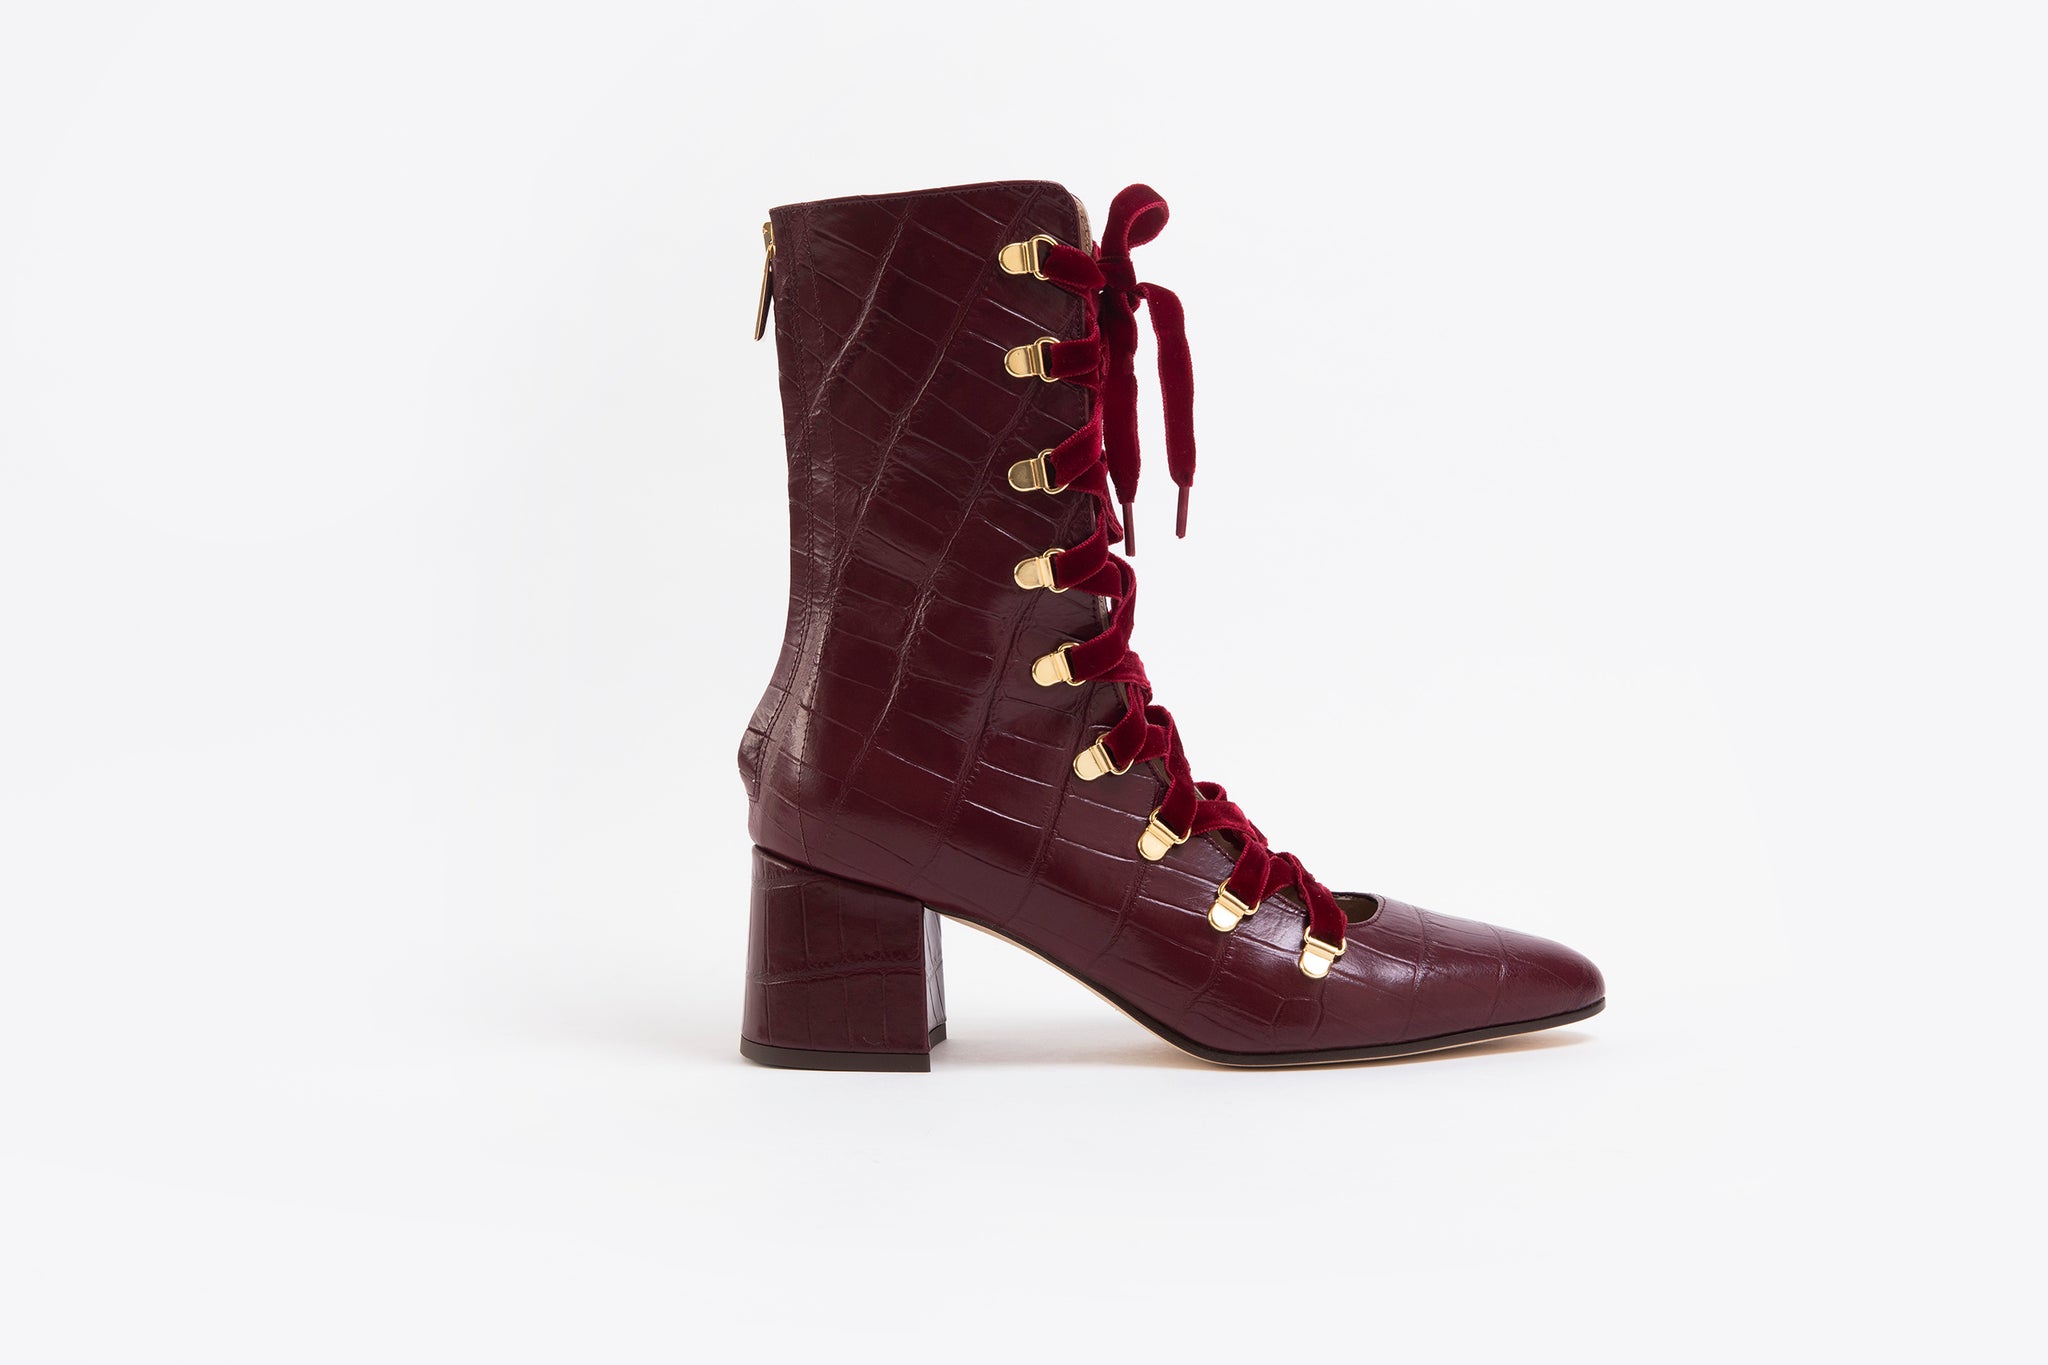 MARY COCCO BORDEAUX